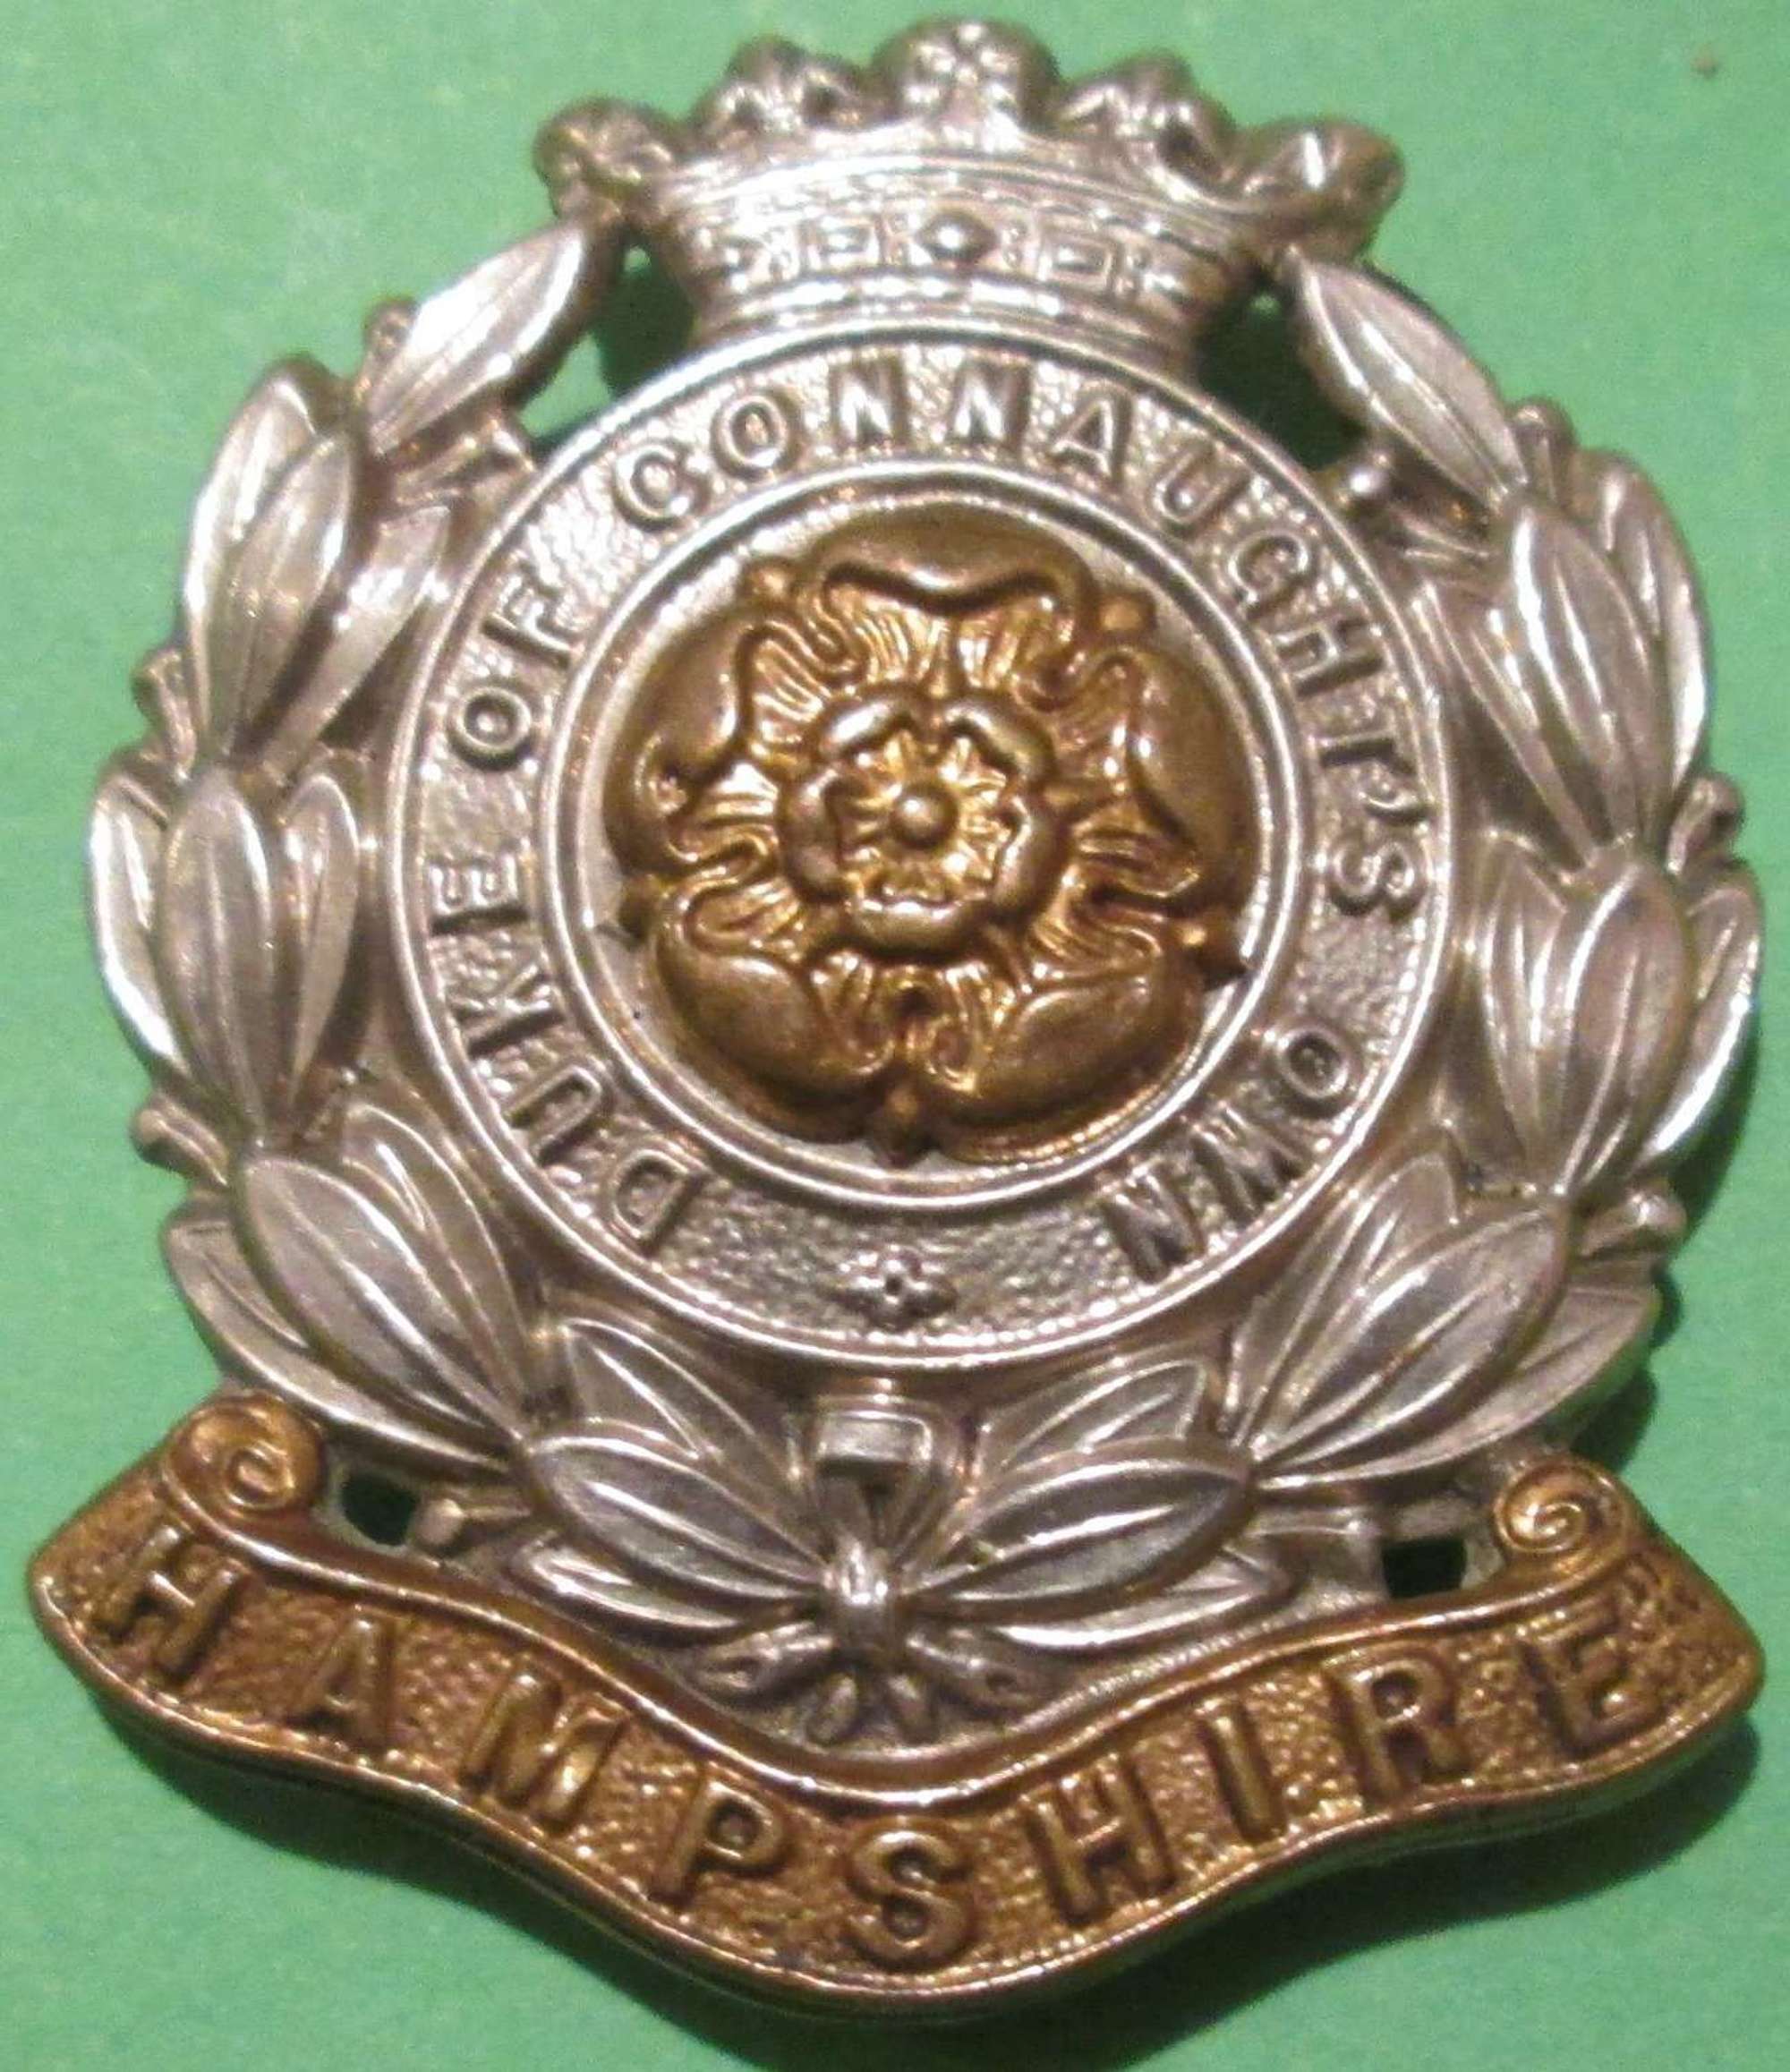 A GOOD DUKE OF CONNAUGHT'S OWN HAMPSHIRE REGT CAP BADGE